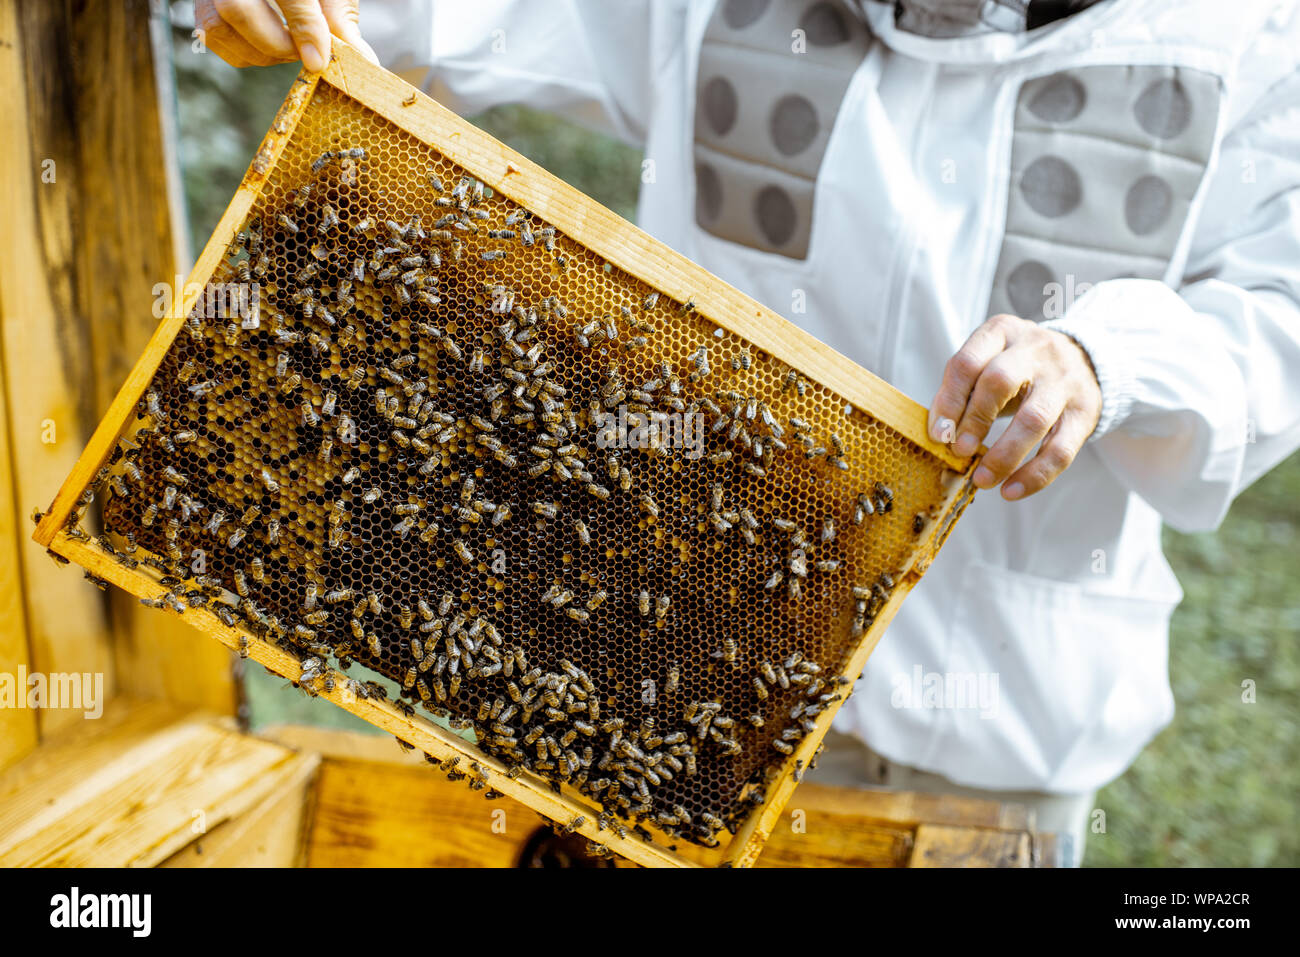 Beekeeper getting honeycombs with bees from the wooden hive, close-up view Stock Photo